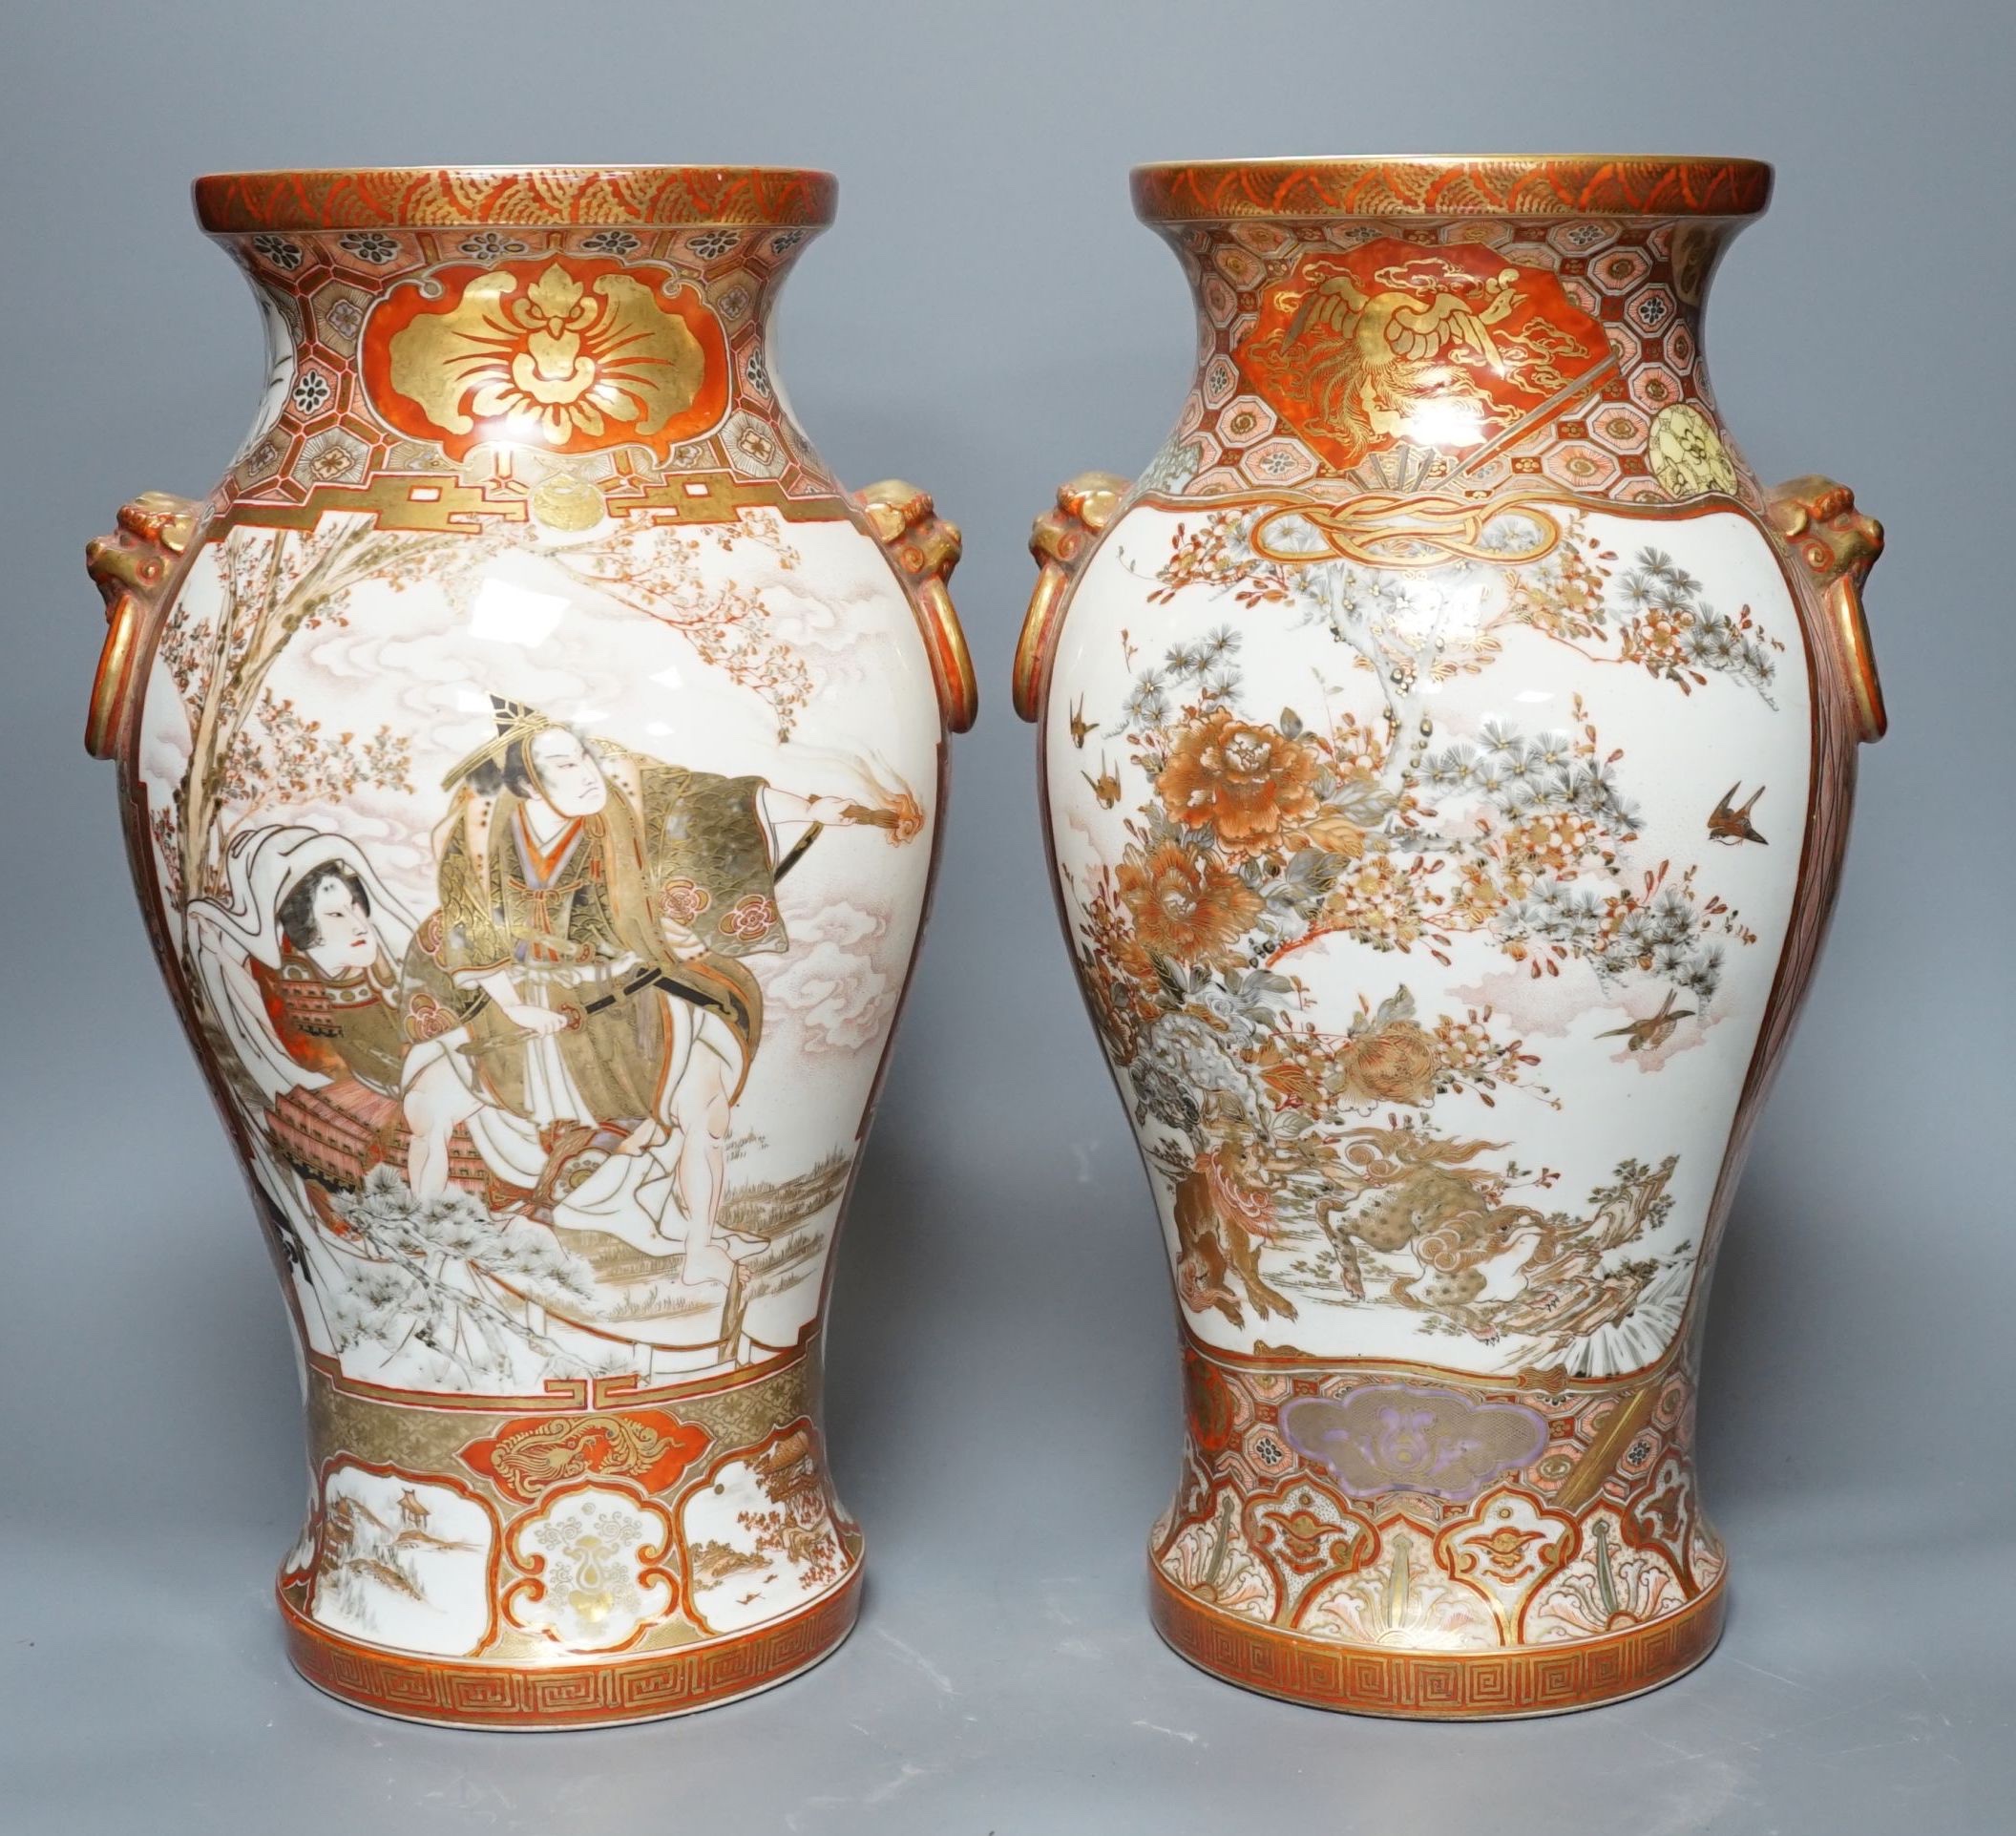 A pair of Japanese Kutani vases (one a.f.) - 37cm high